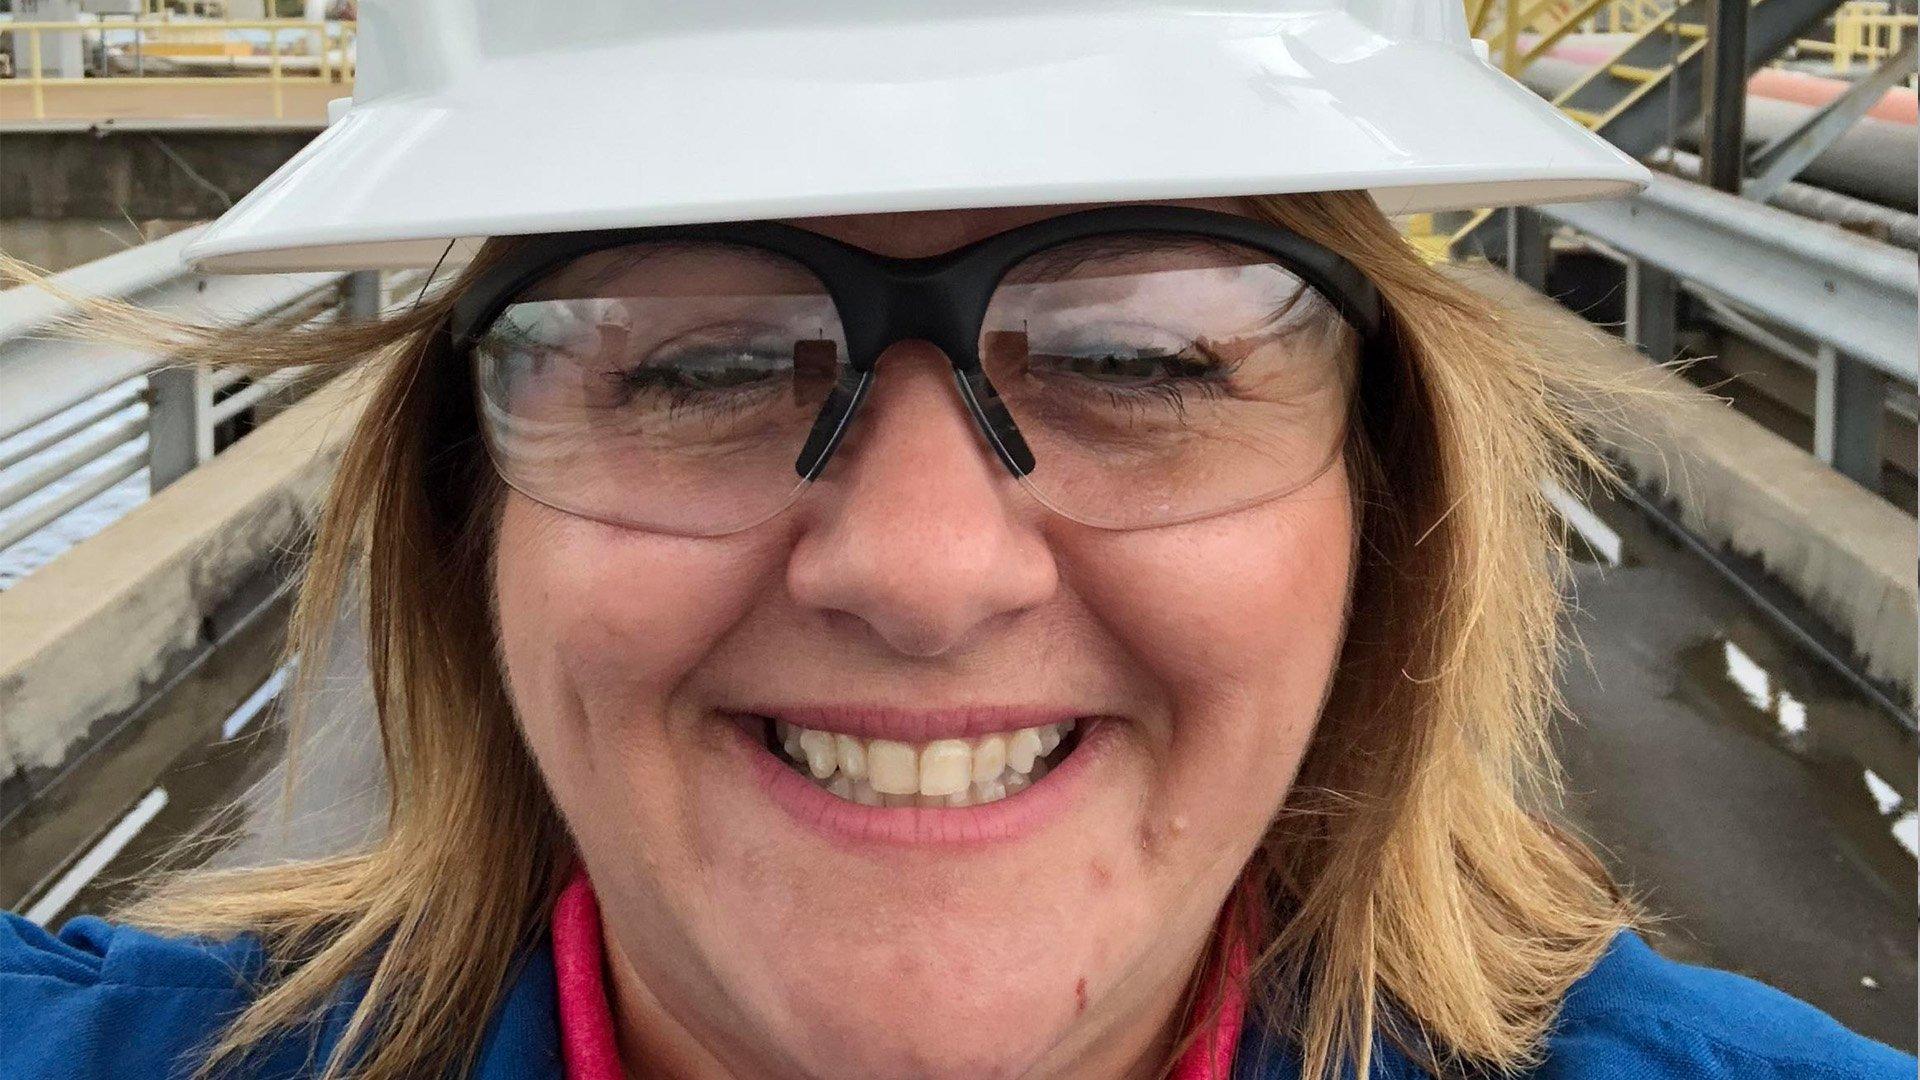 Kathy V, wearing a hard hat and safety glasses, smiles in a selfie taken on a jobsite.